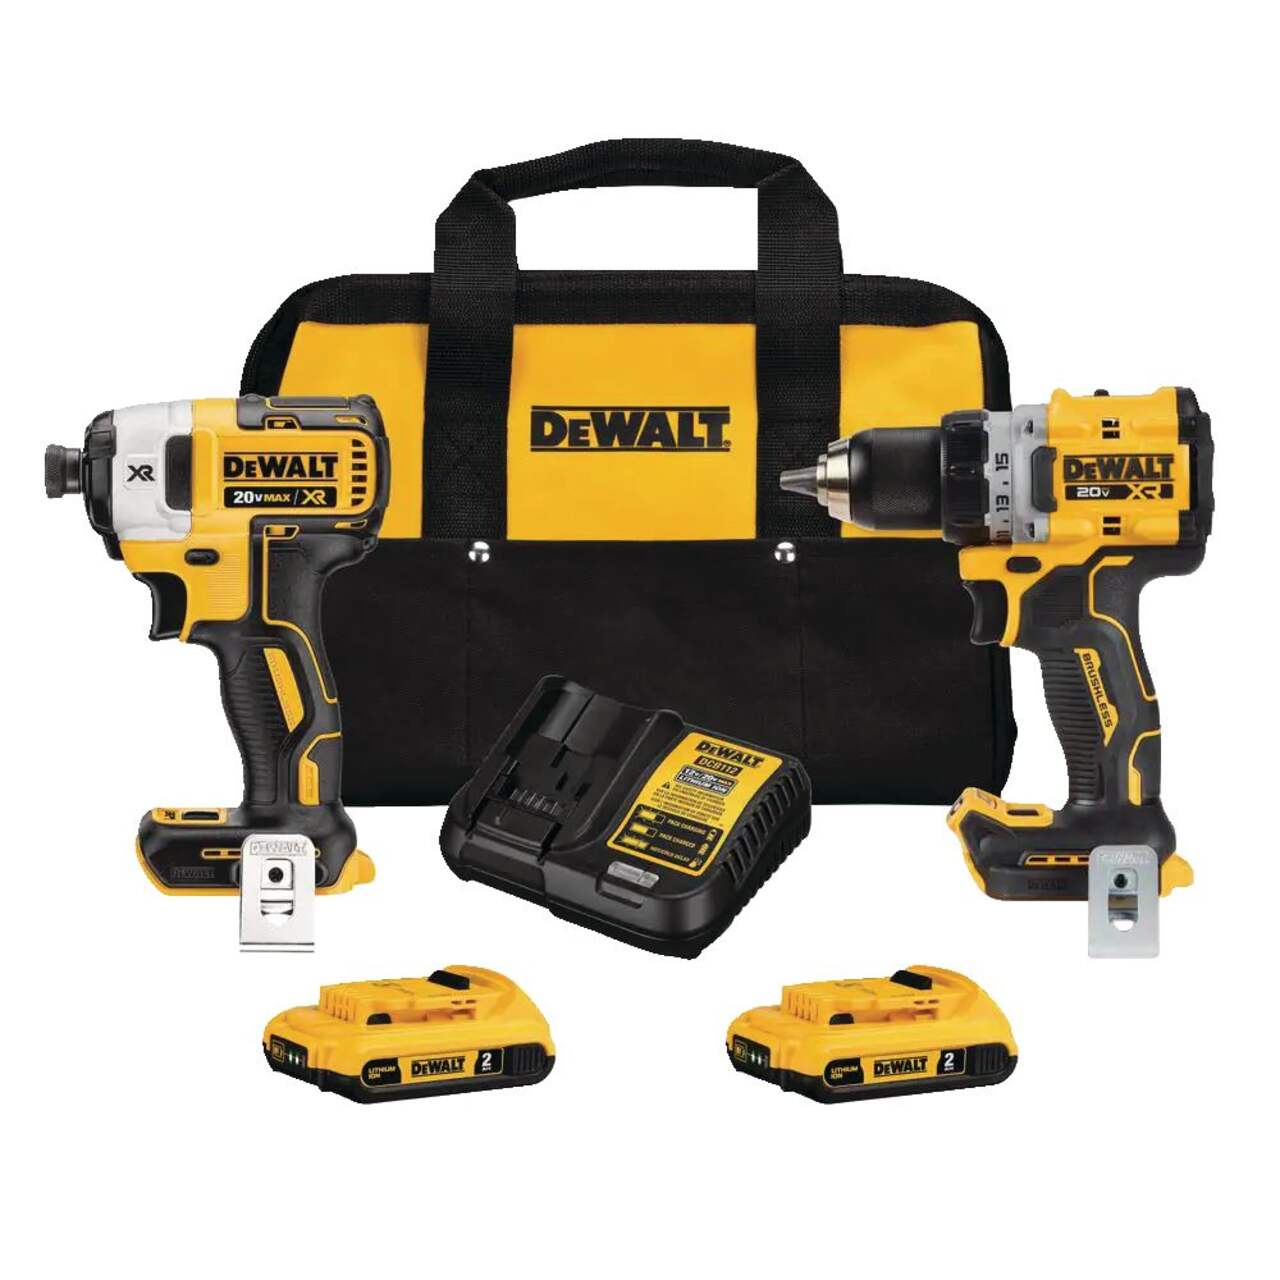 https://media-www.canadiantire.ca/product/fixing/tools/portable-power-tools/0547584/dw-20v-drill-driver-impact-driver-kit-4a0edc19-fb41-4180-9c63-de013b7e4b17-jpgrendition.jpg?imdensity=1&imwidth=640&impolicy=mZoom